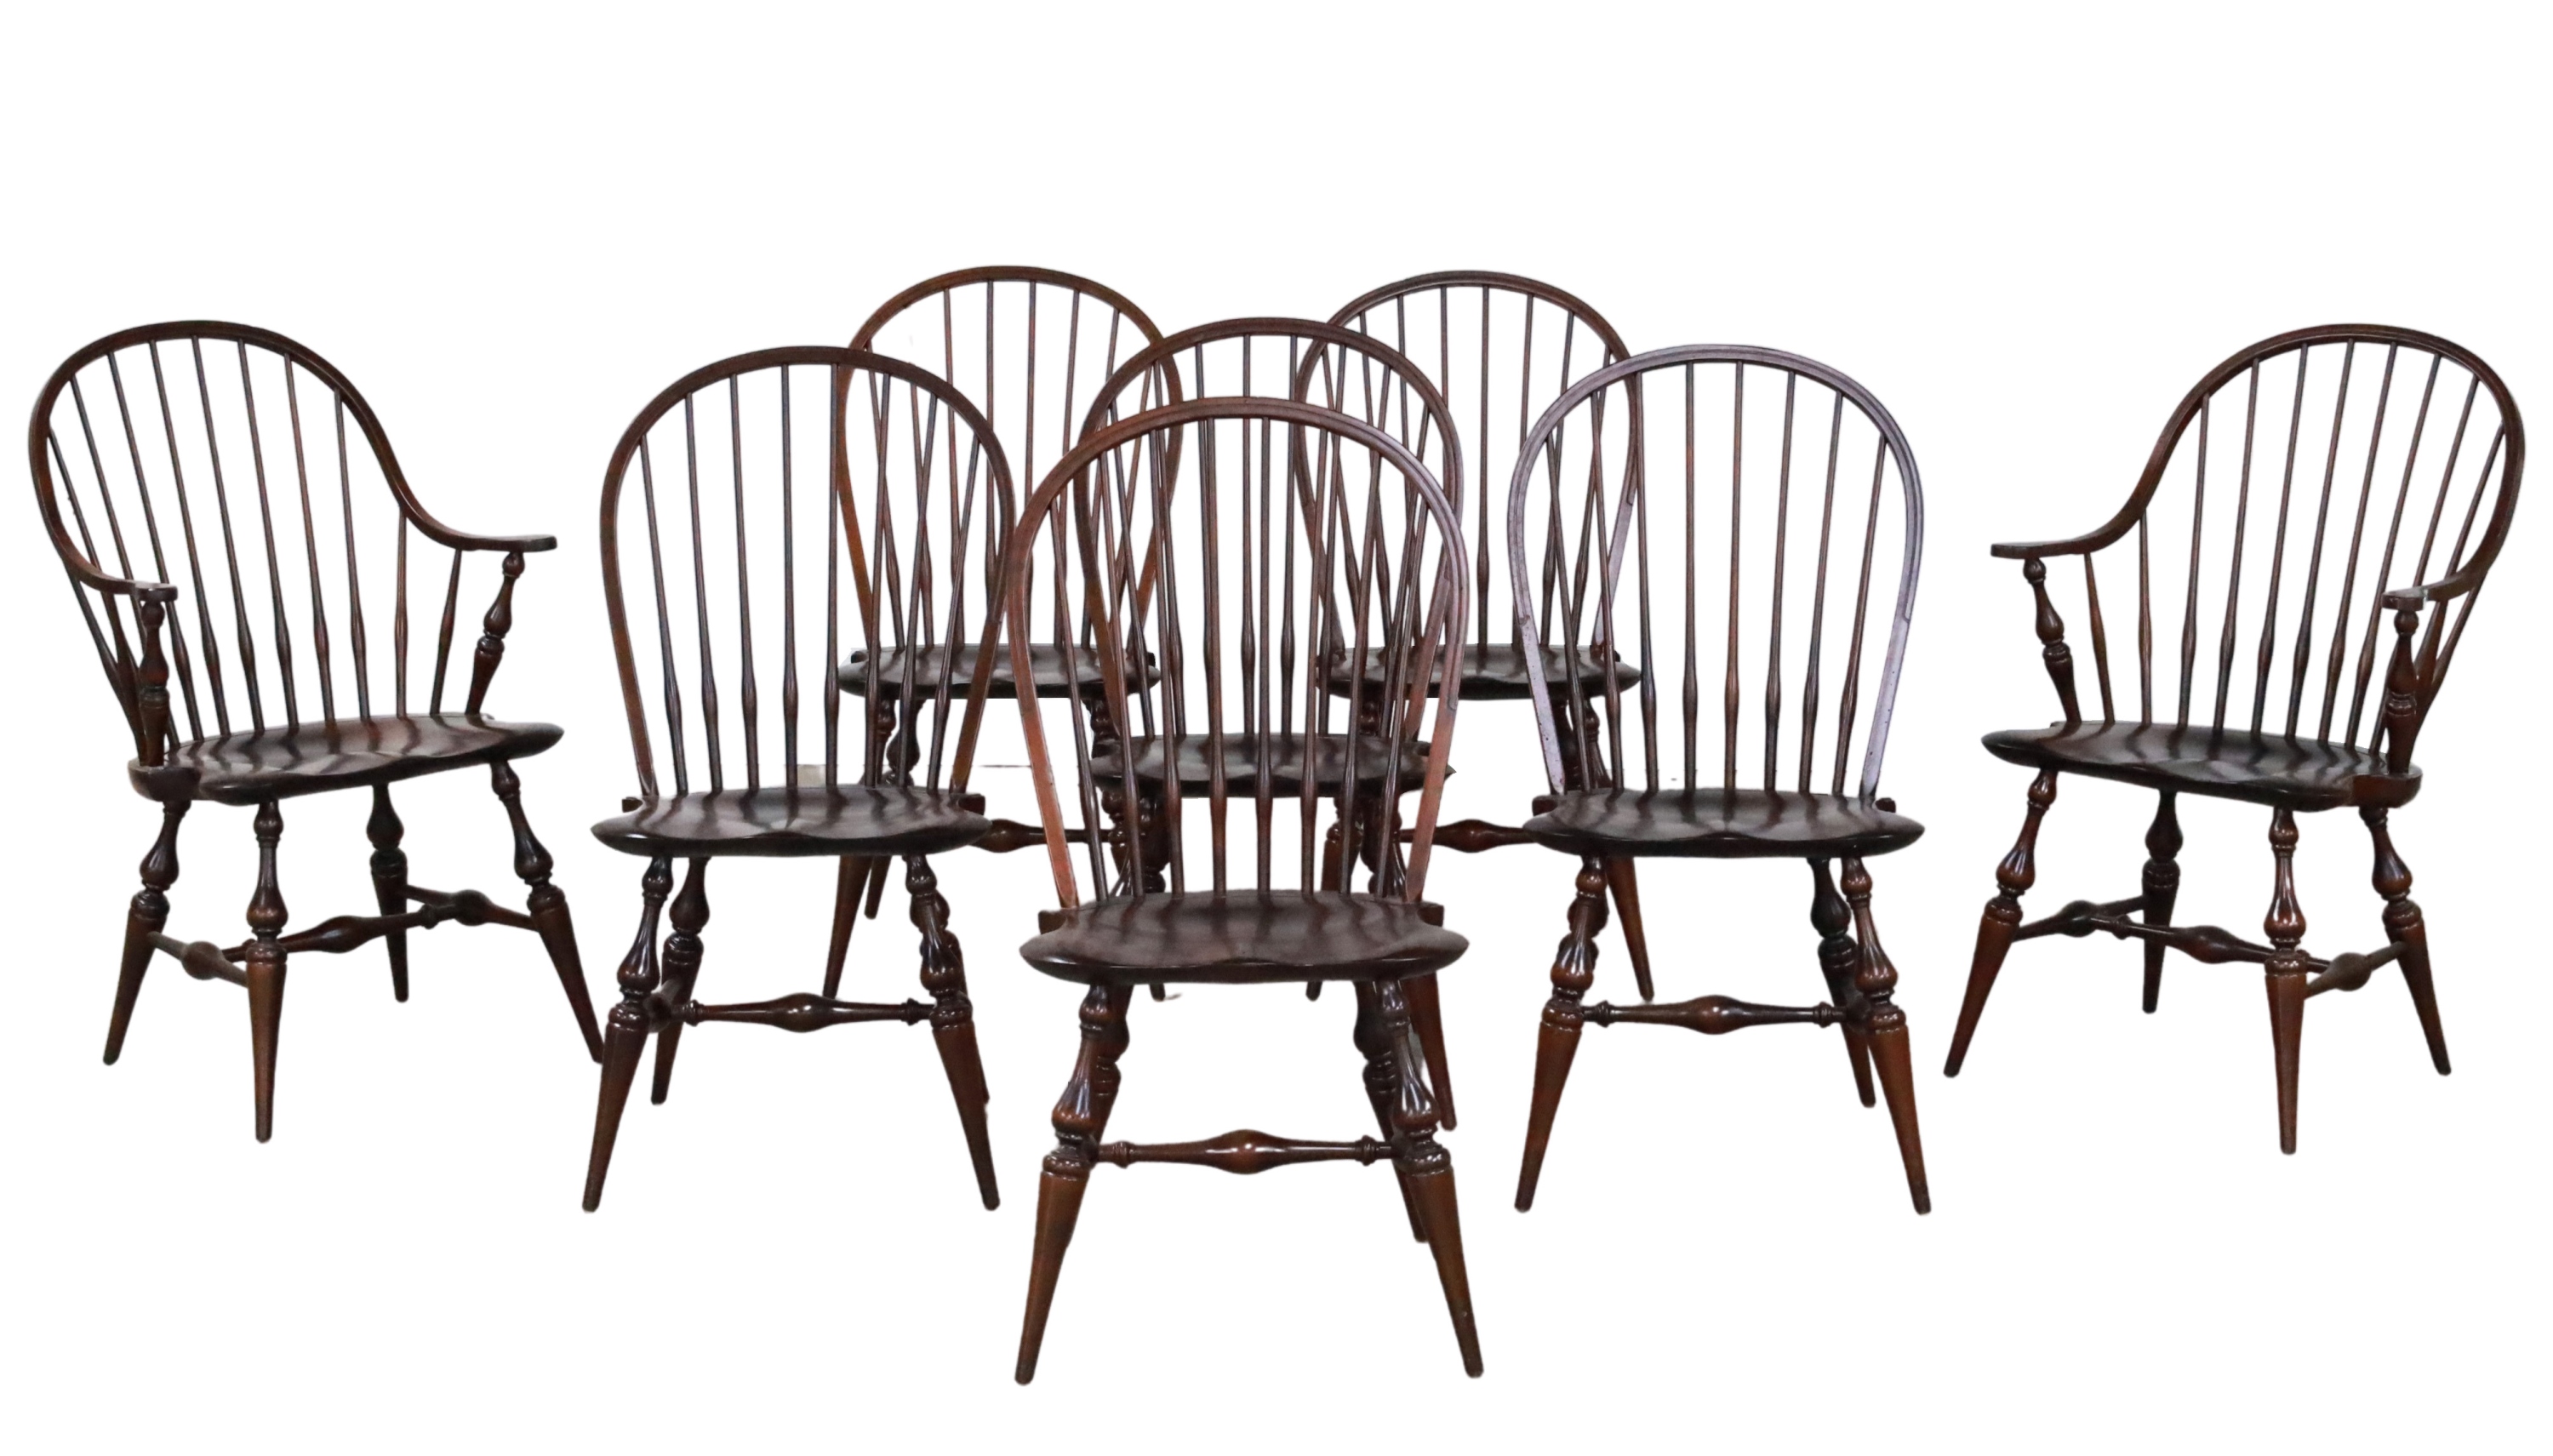 8 AMERICAN NEW ENGLAND WINDSOR CHAIRS